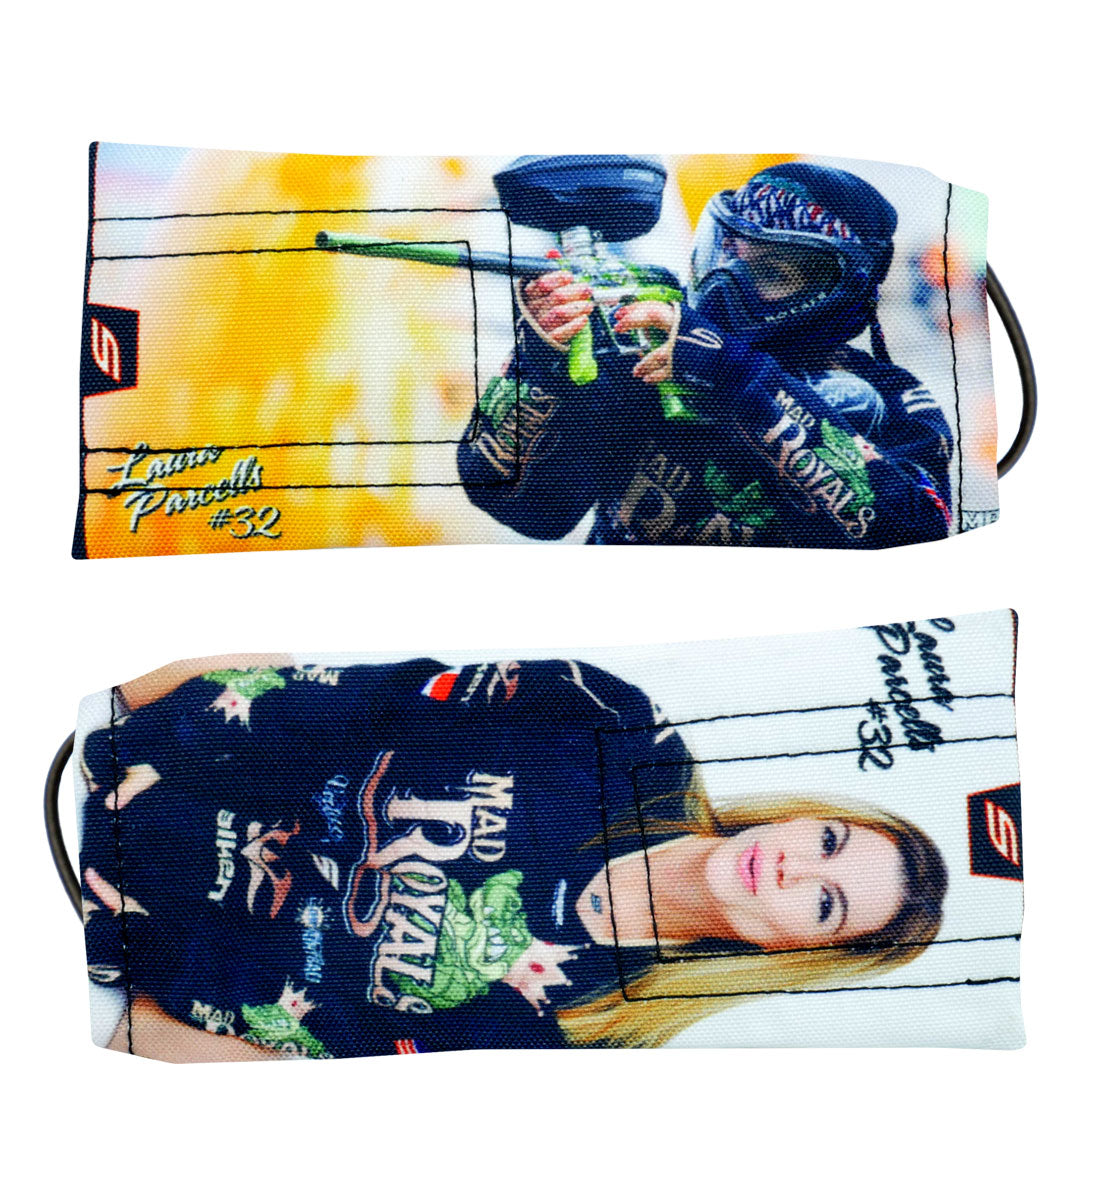 Barrel Cover, Laura Parcells, No. 2 Mad Royals, Paintball Girls Series